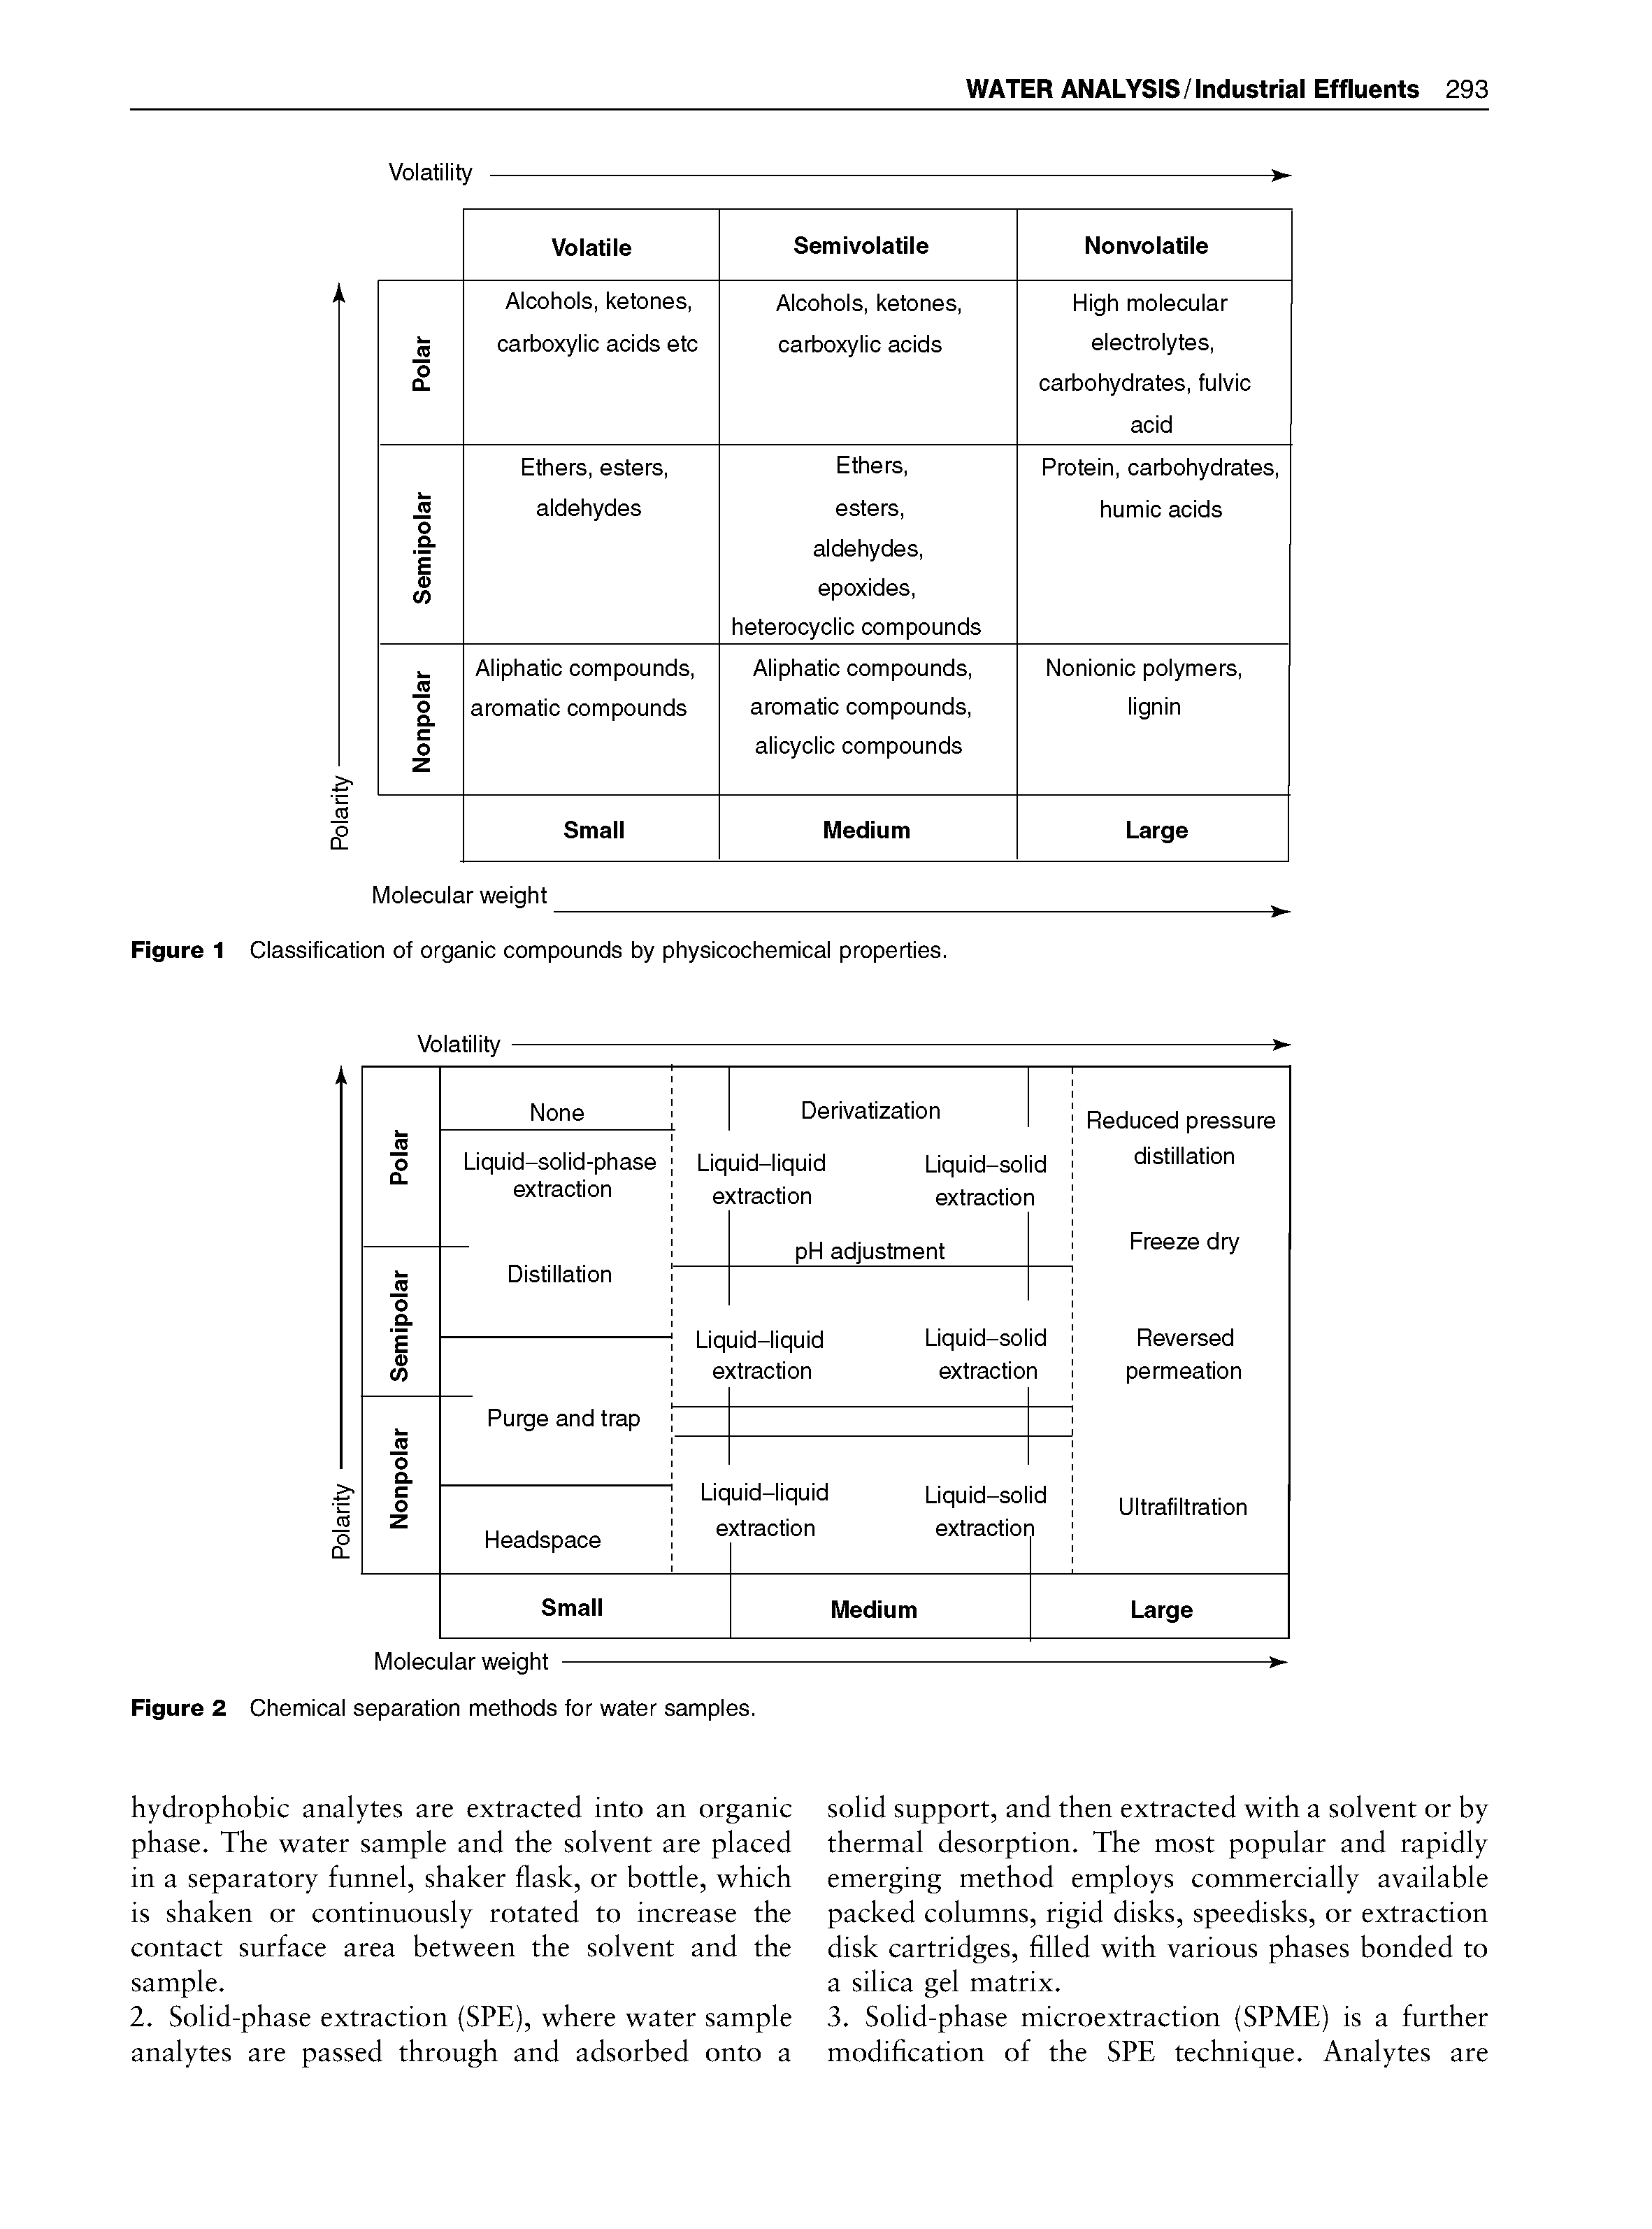 Figure 1 Classification of organic compounds by physicochemical properties.